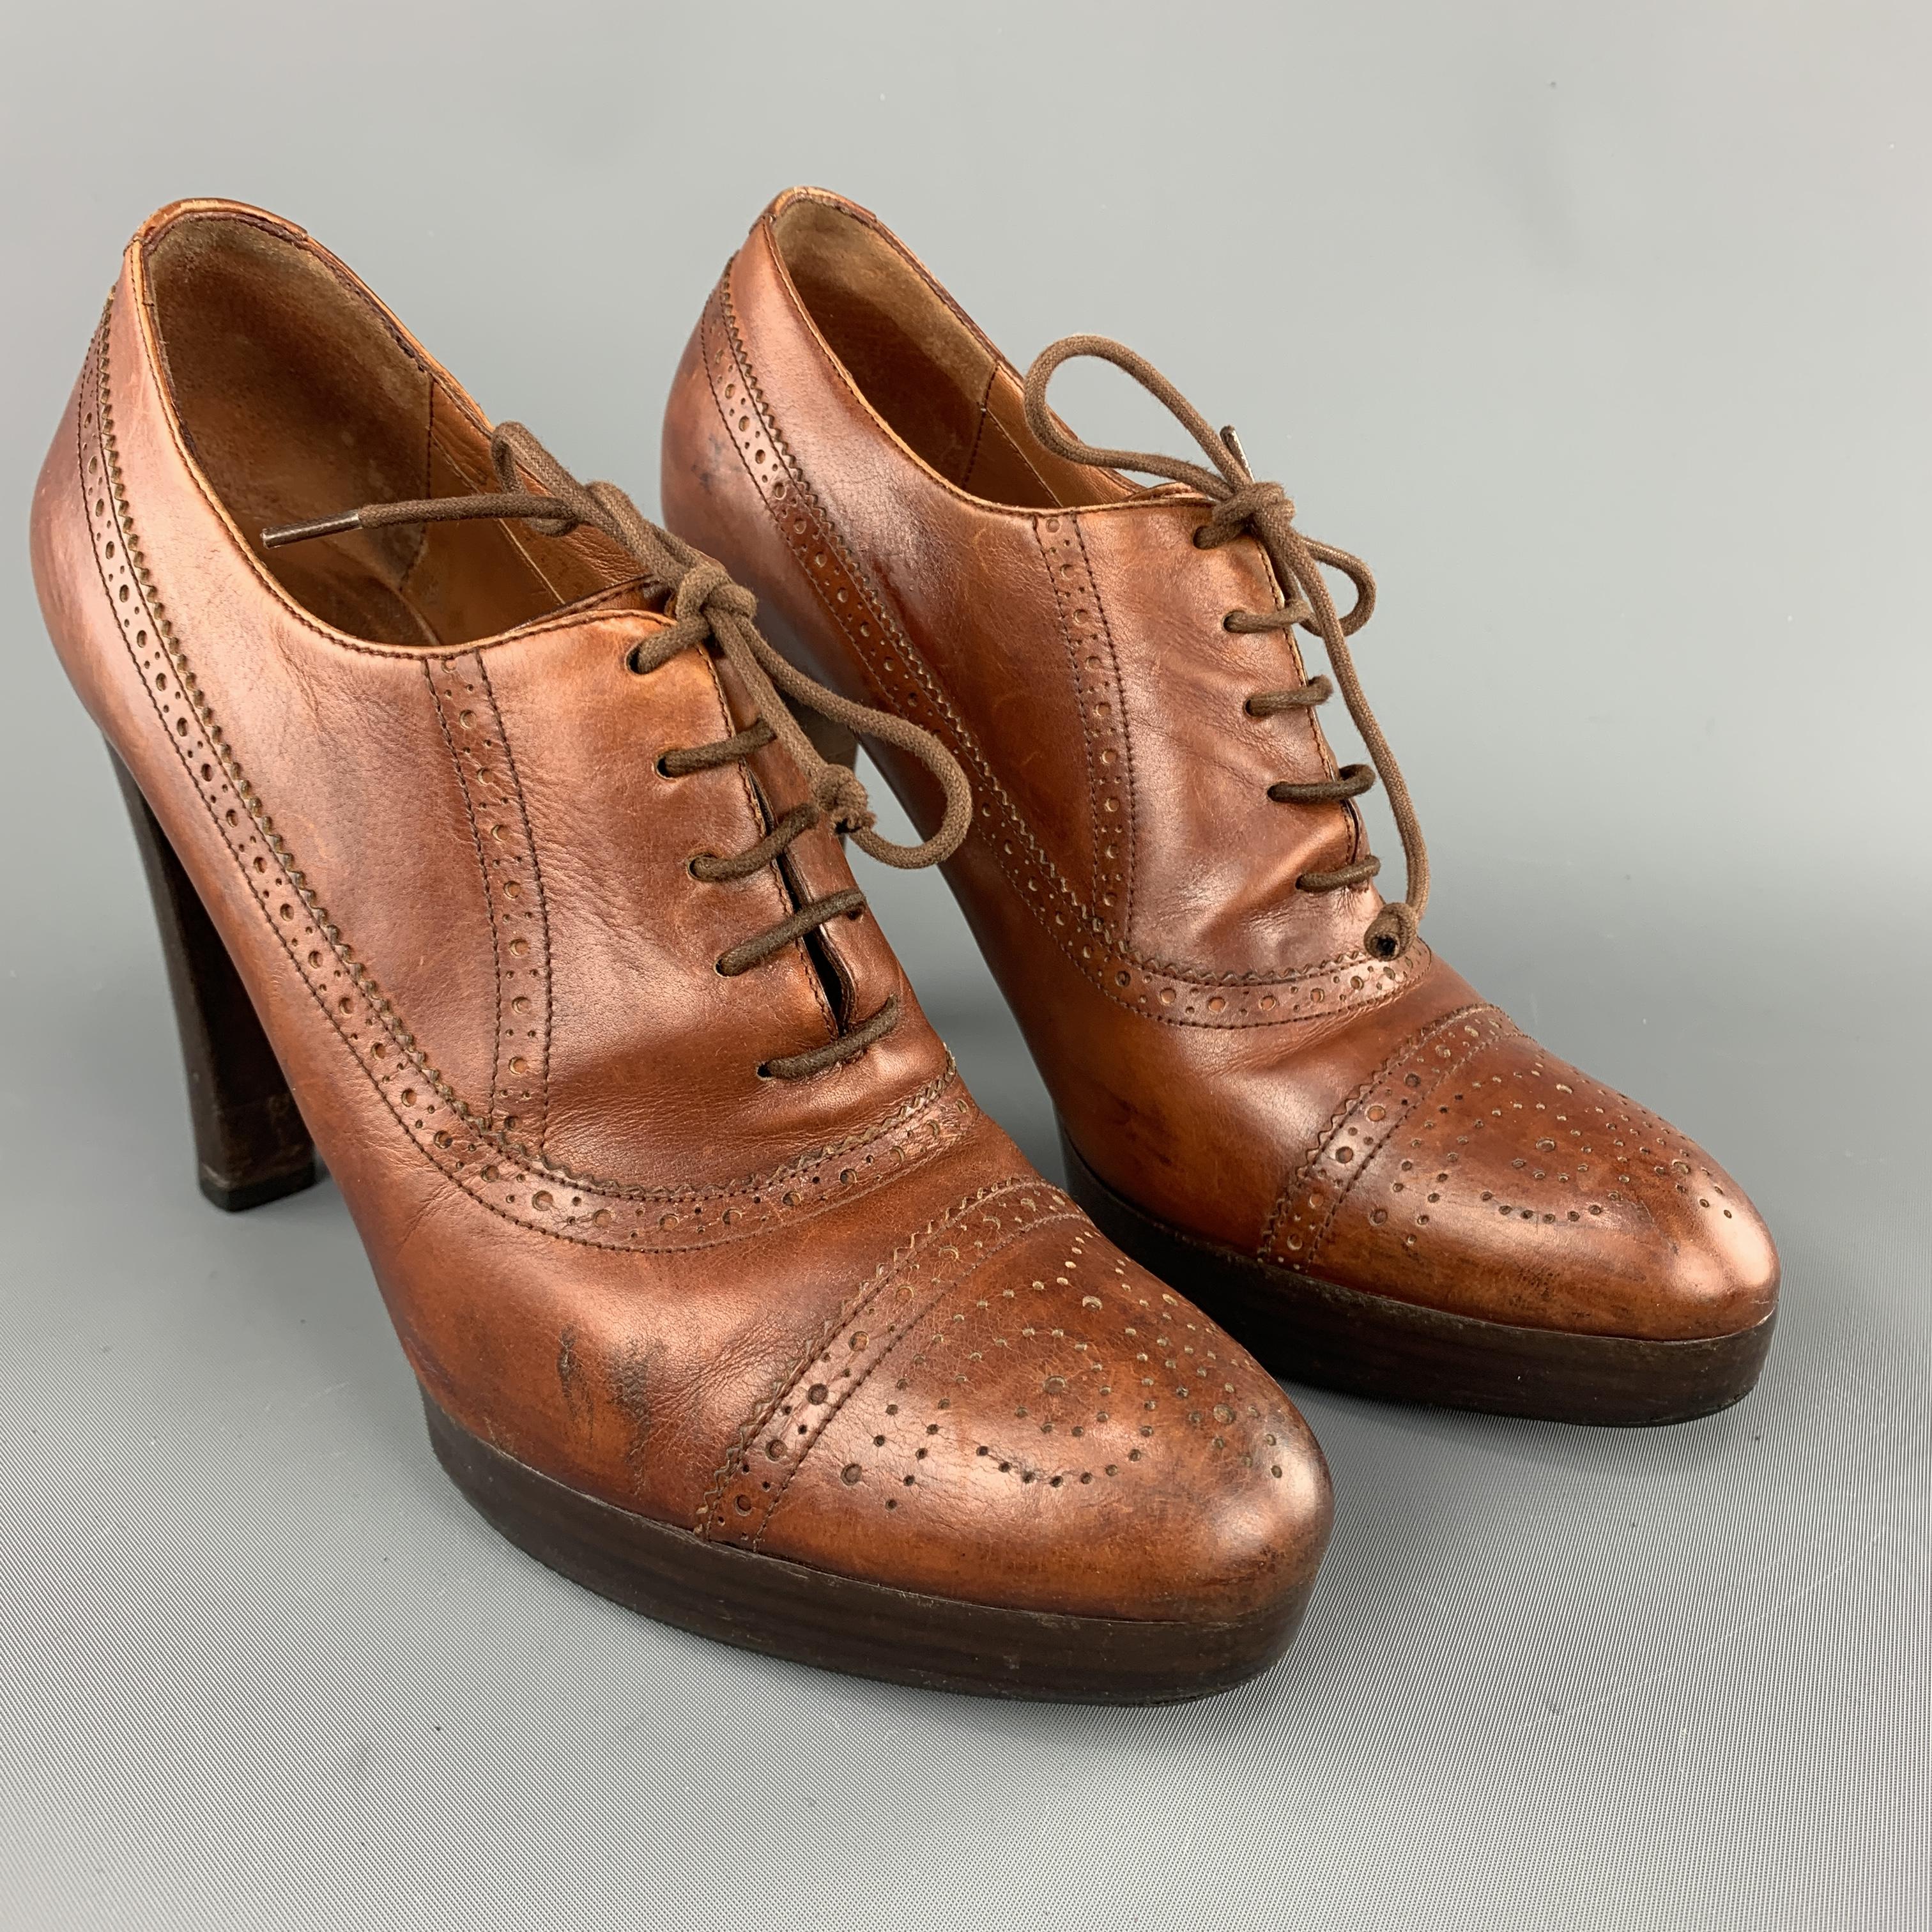 RALPH LAUREN COLLECTION oxford pumps come in tan leather with stacked heel and platform. Wear throughout. As-is. Made in Italy.

Good Pre-Owned Condition.
Marked: US 8 B

Heel: 4.45 in.
Platform: 0.75 in.